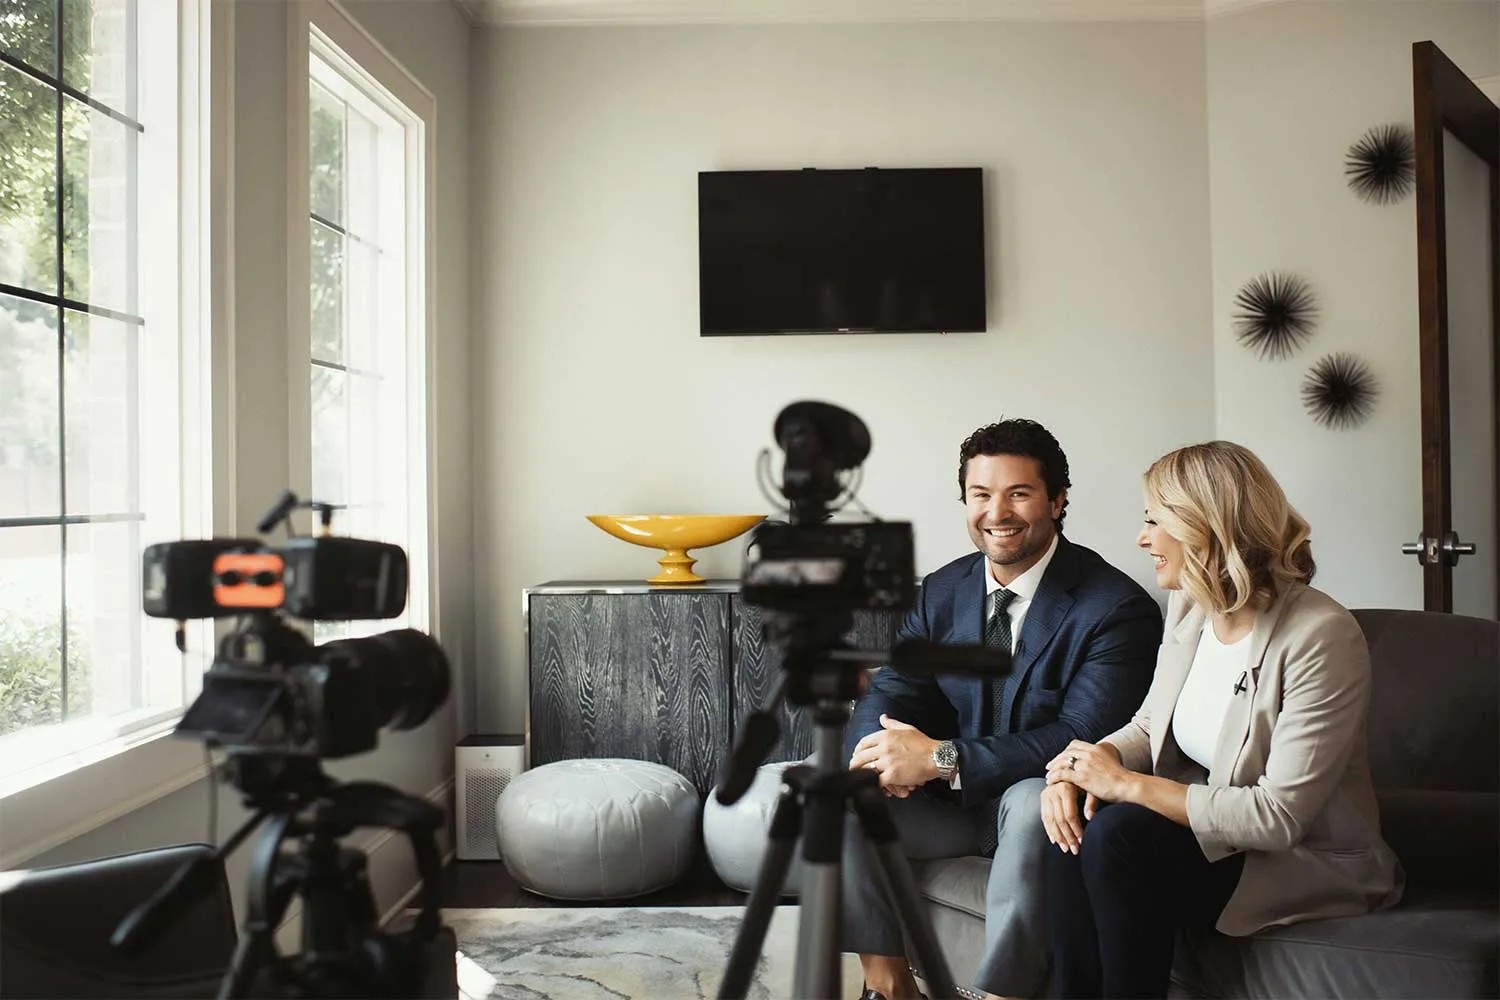 Two people, a man and a woman in business attire, are sitting on a sofa being filmed by a camera in a well-lit, modern living room, discussing dental marketing strategies.